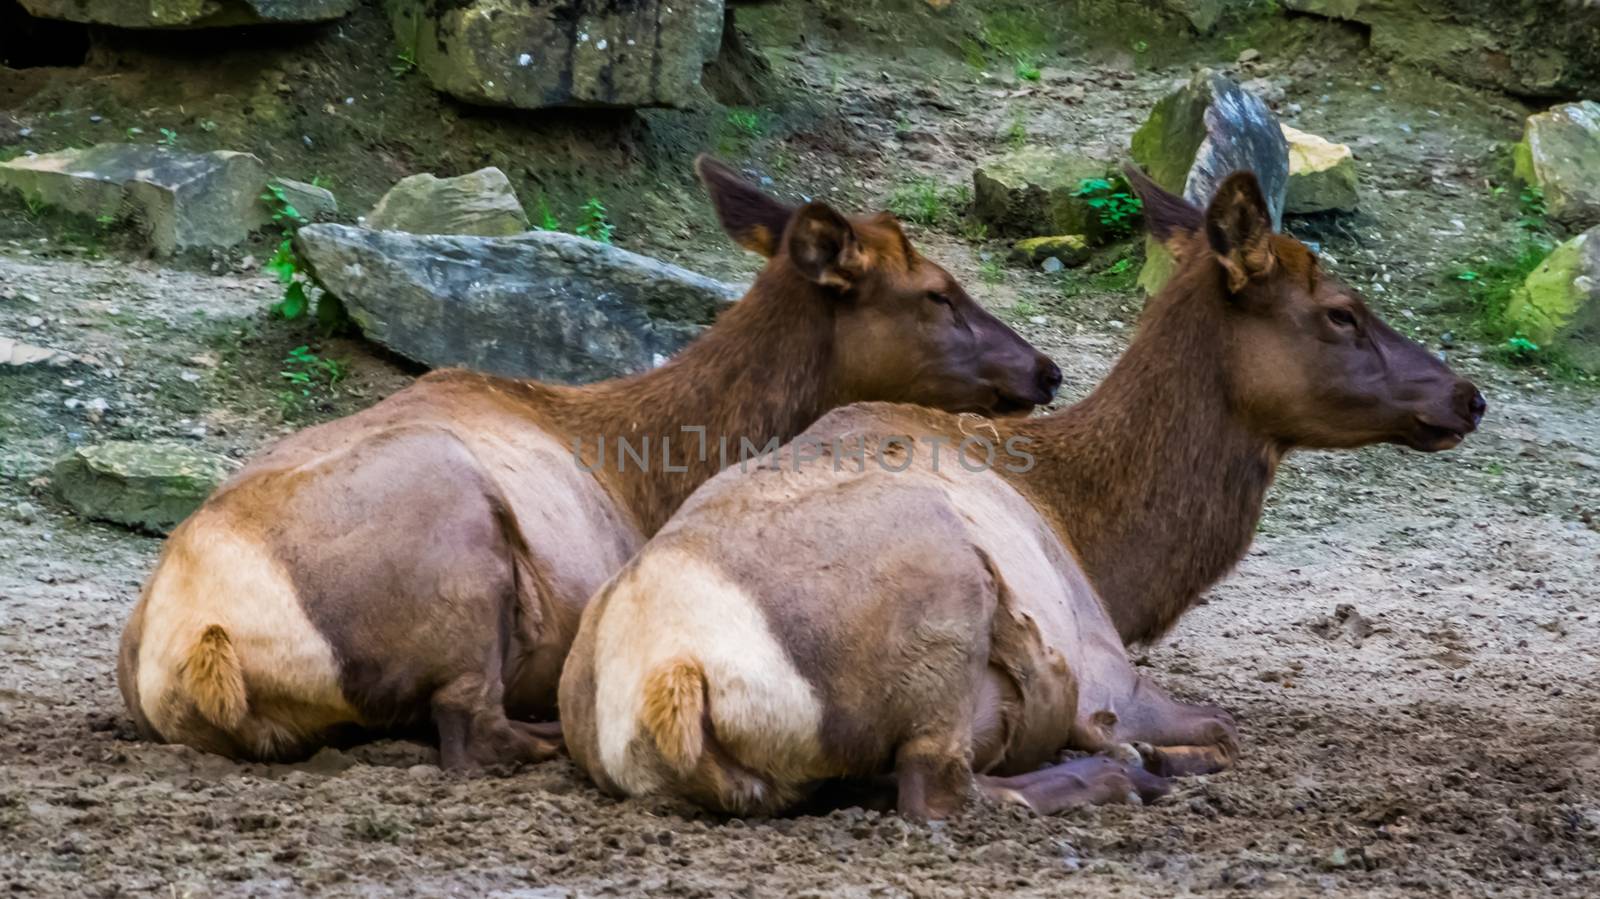 female wapiti couple sitting together on the ground, tropical deer specie from America